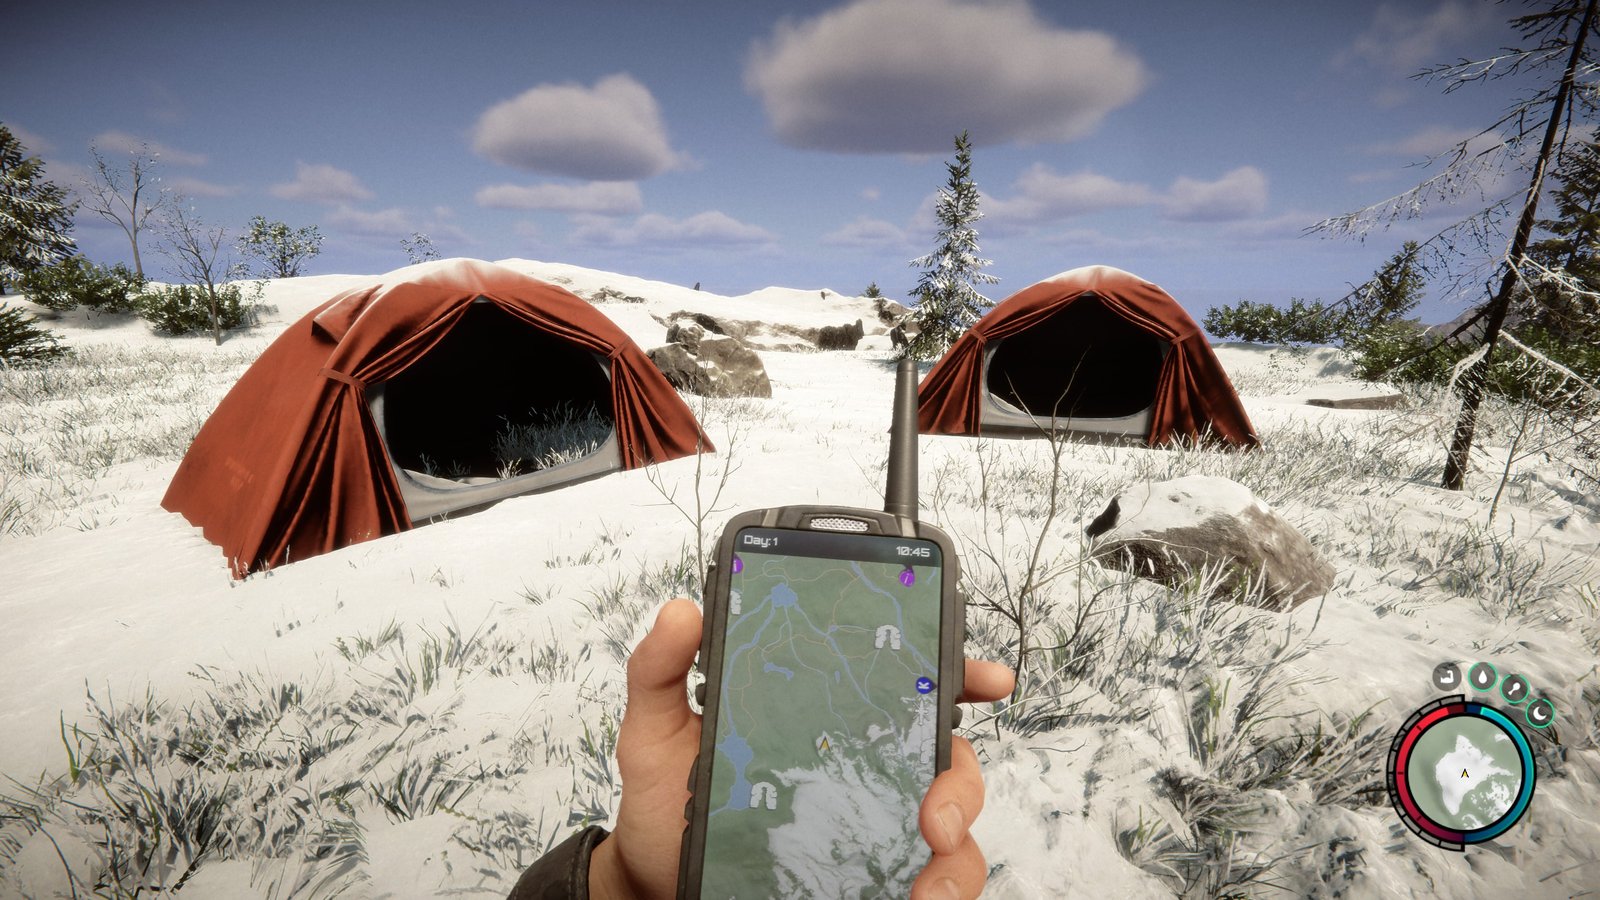 Sons of the Forest hang glider location - two red tents nearby